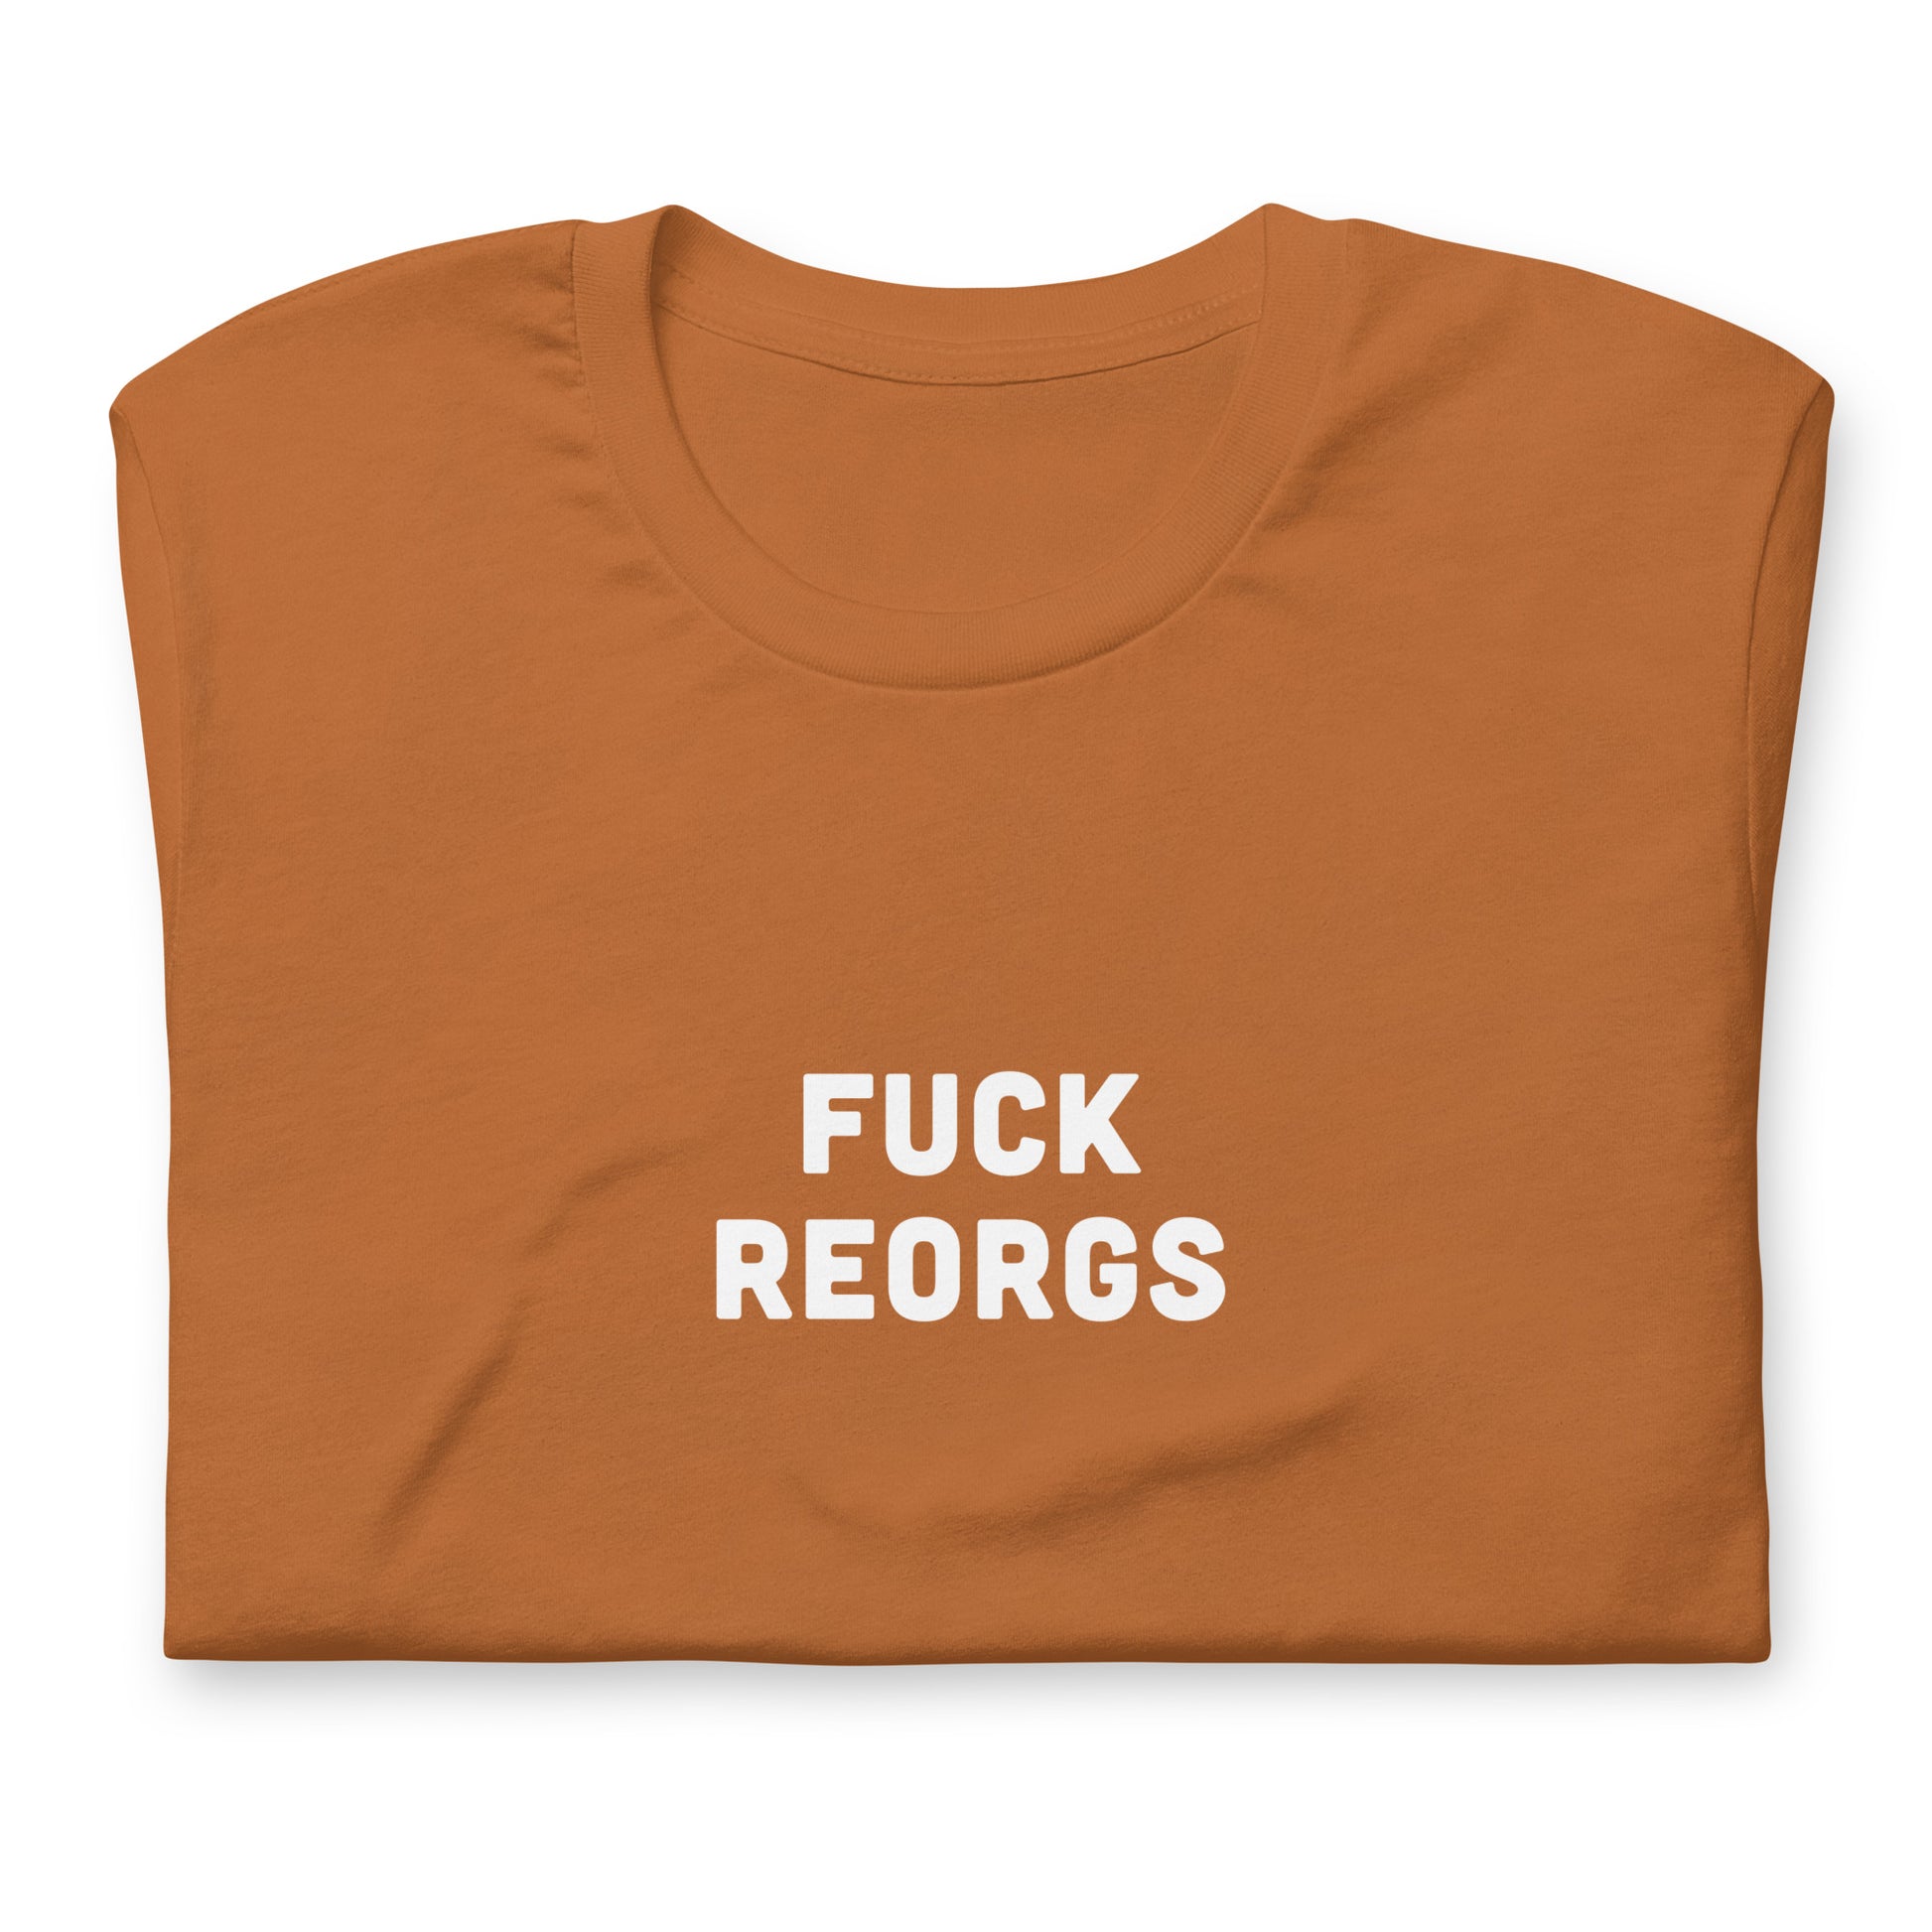 Fuck Reorgs T-Shirt Size XL Color Navy